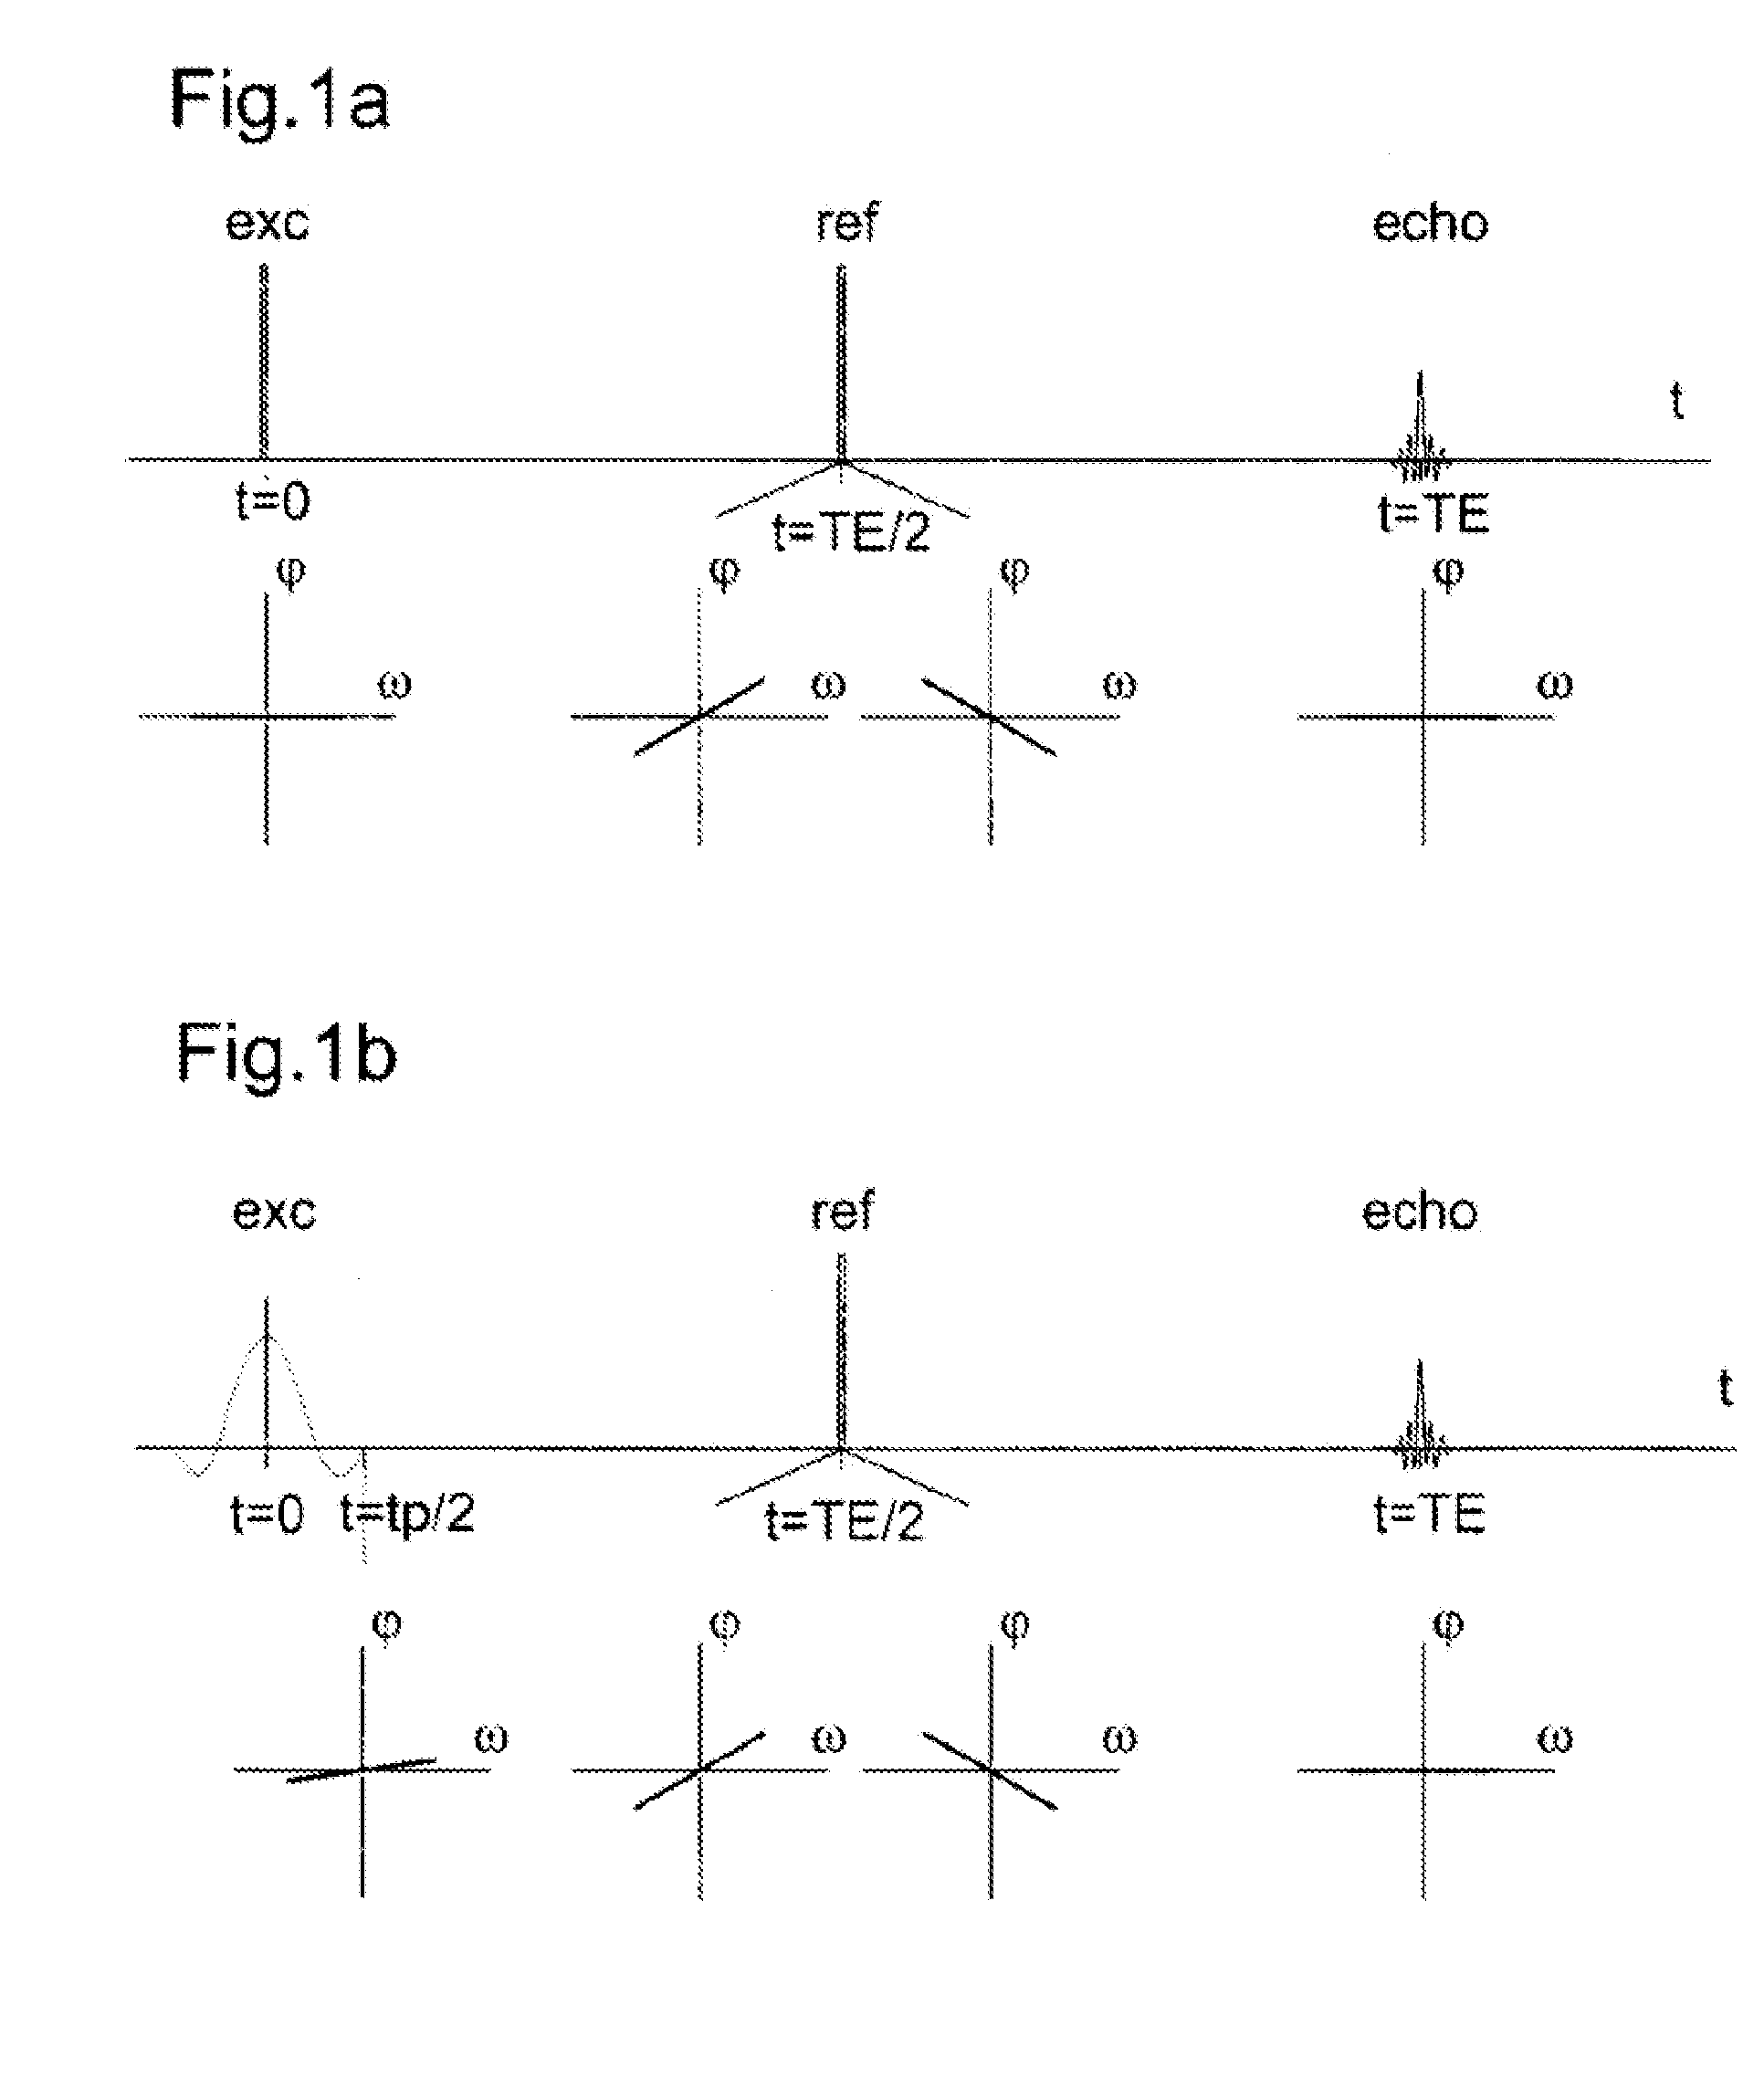 Method of magnetic resonance with excitation by a prewinding pulse